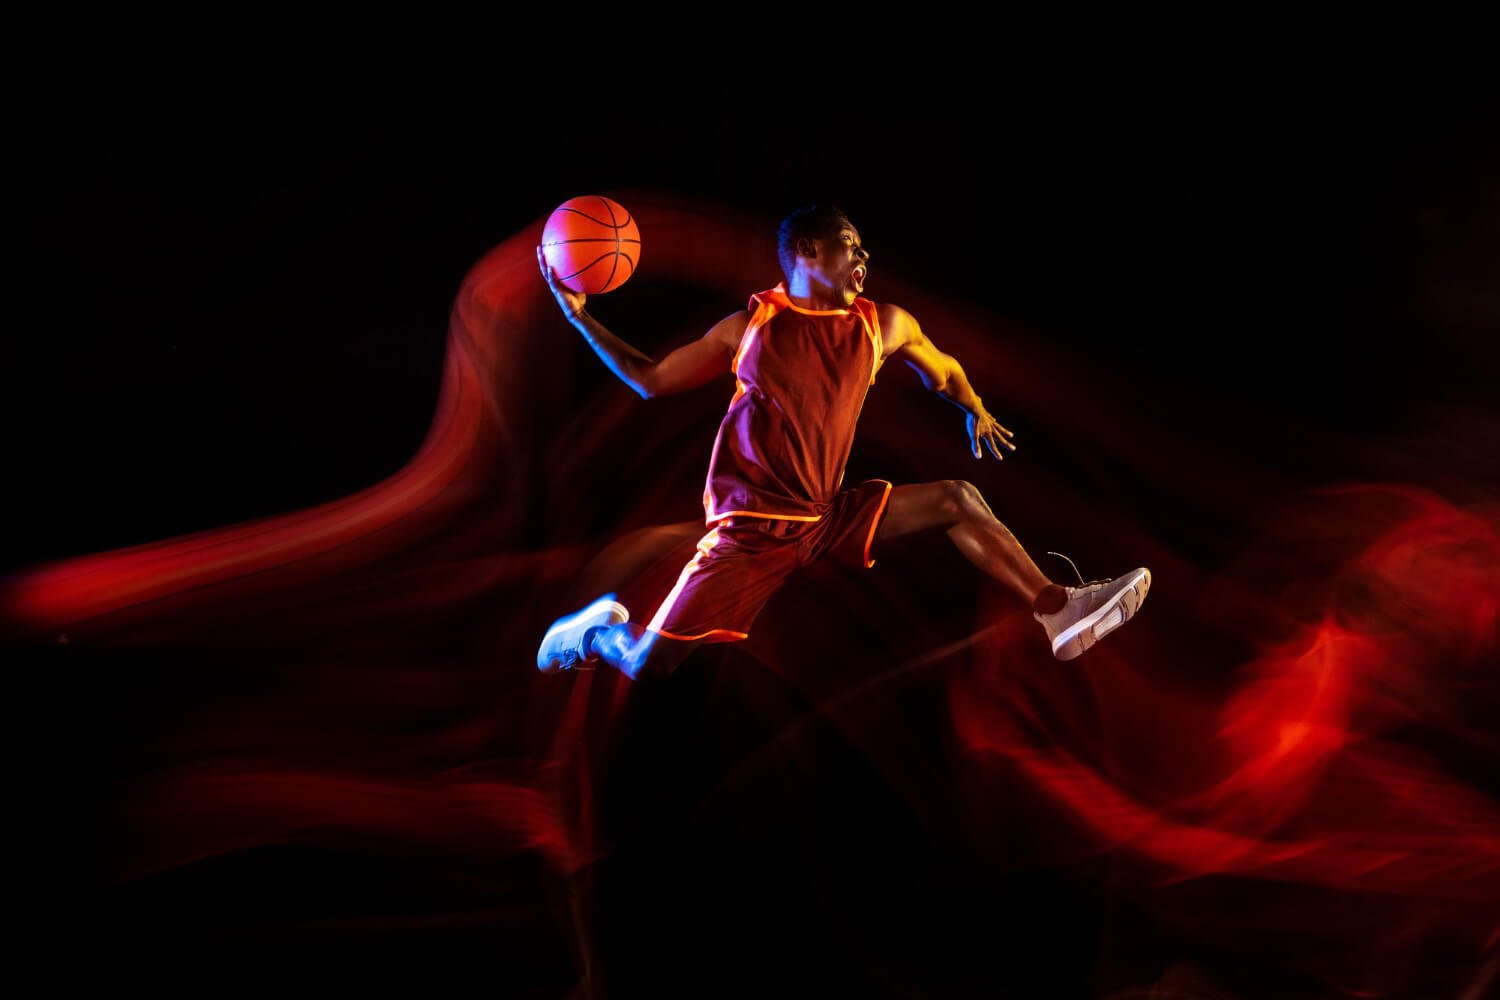 emotions-winner-african-american-young-basketball-player-red-team-action-neon-lights-dark-studio-background-concept-sport-movement-energy-dynamic-healthy-lifestyle